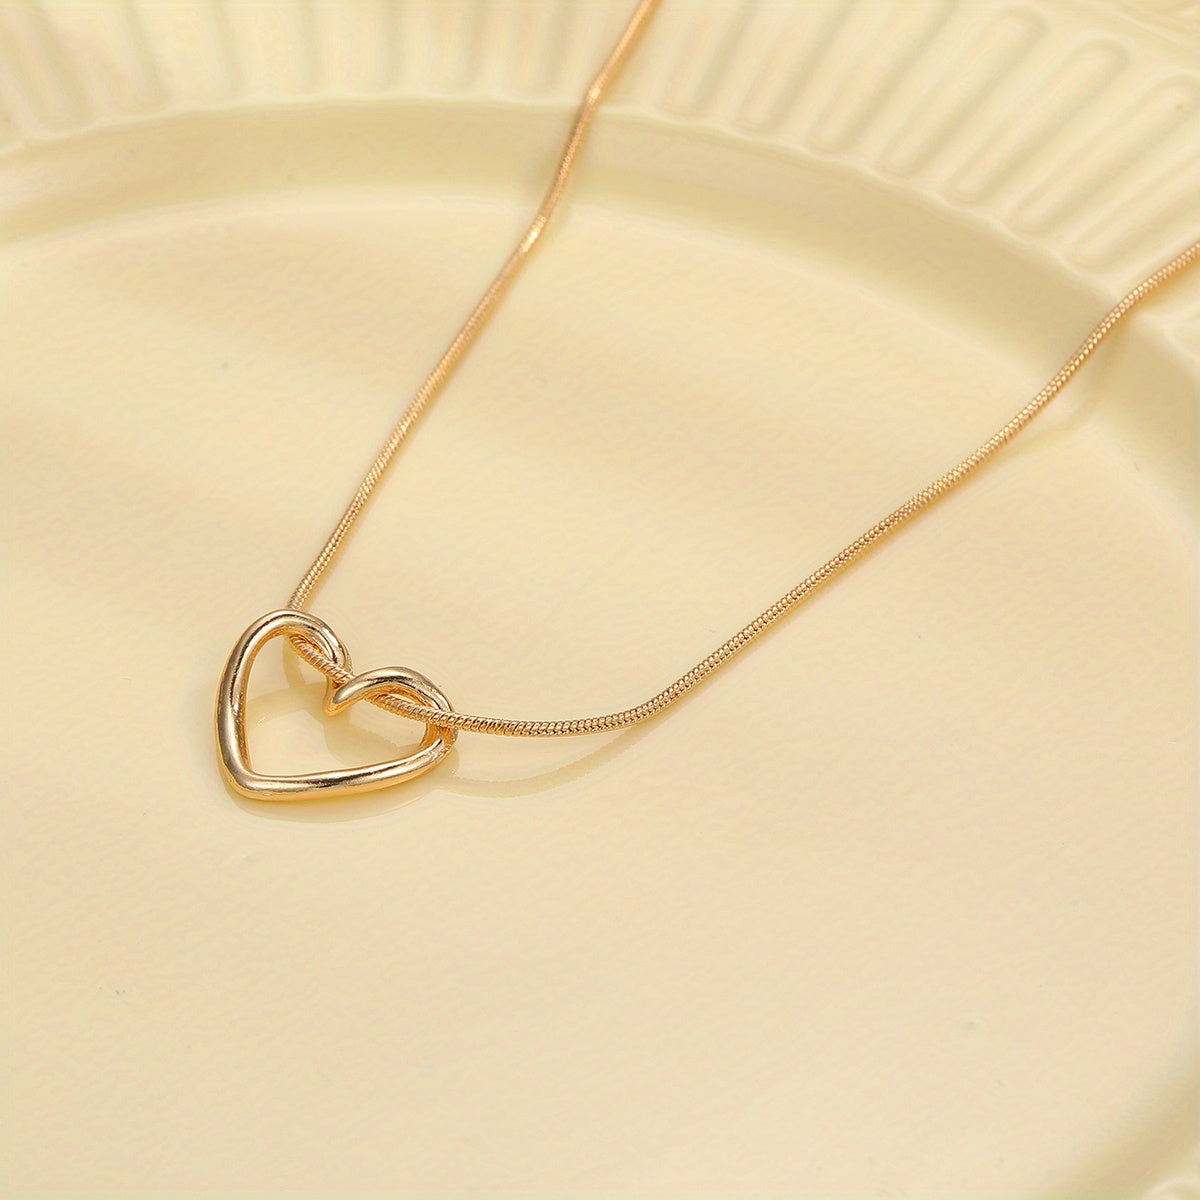 Surprise Your Loved One with a Sweet Hollow Love Heart Pendant Necklace - Perfect Valentine's Day Gift!